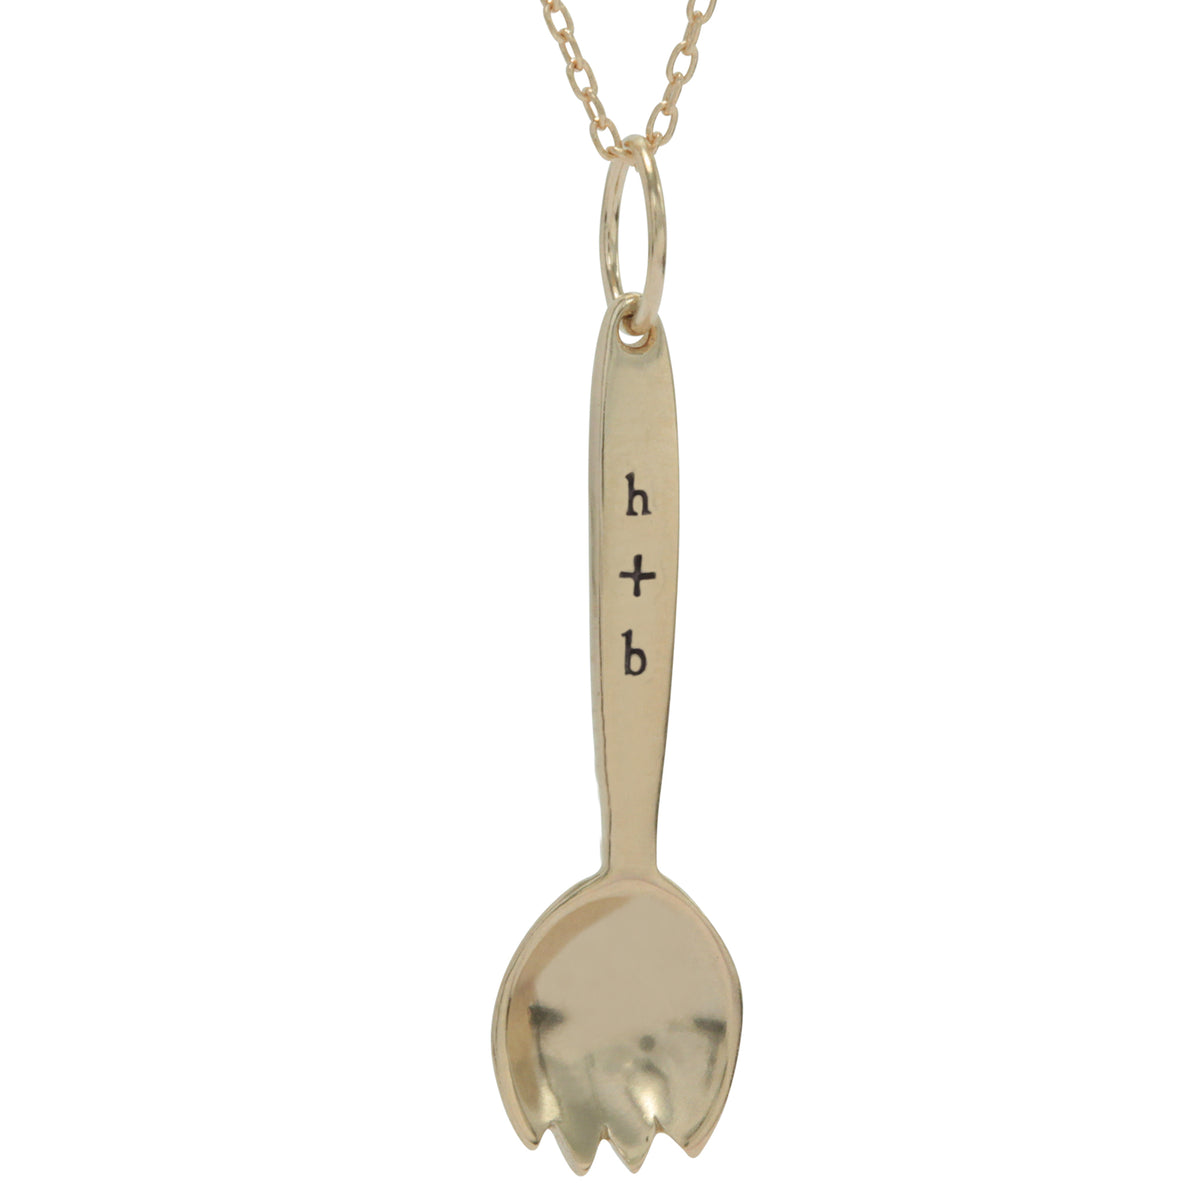 What is a Tiny Spoon Necklace